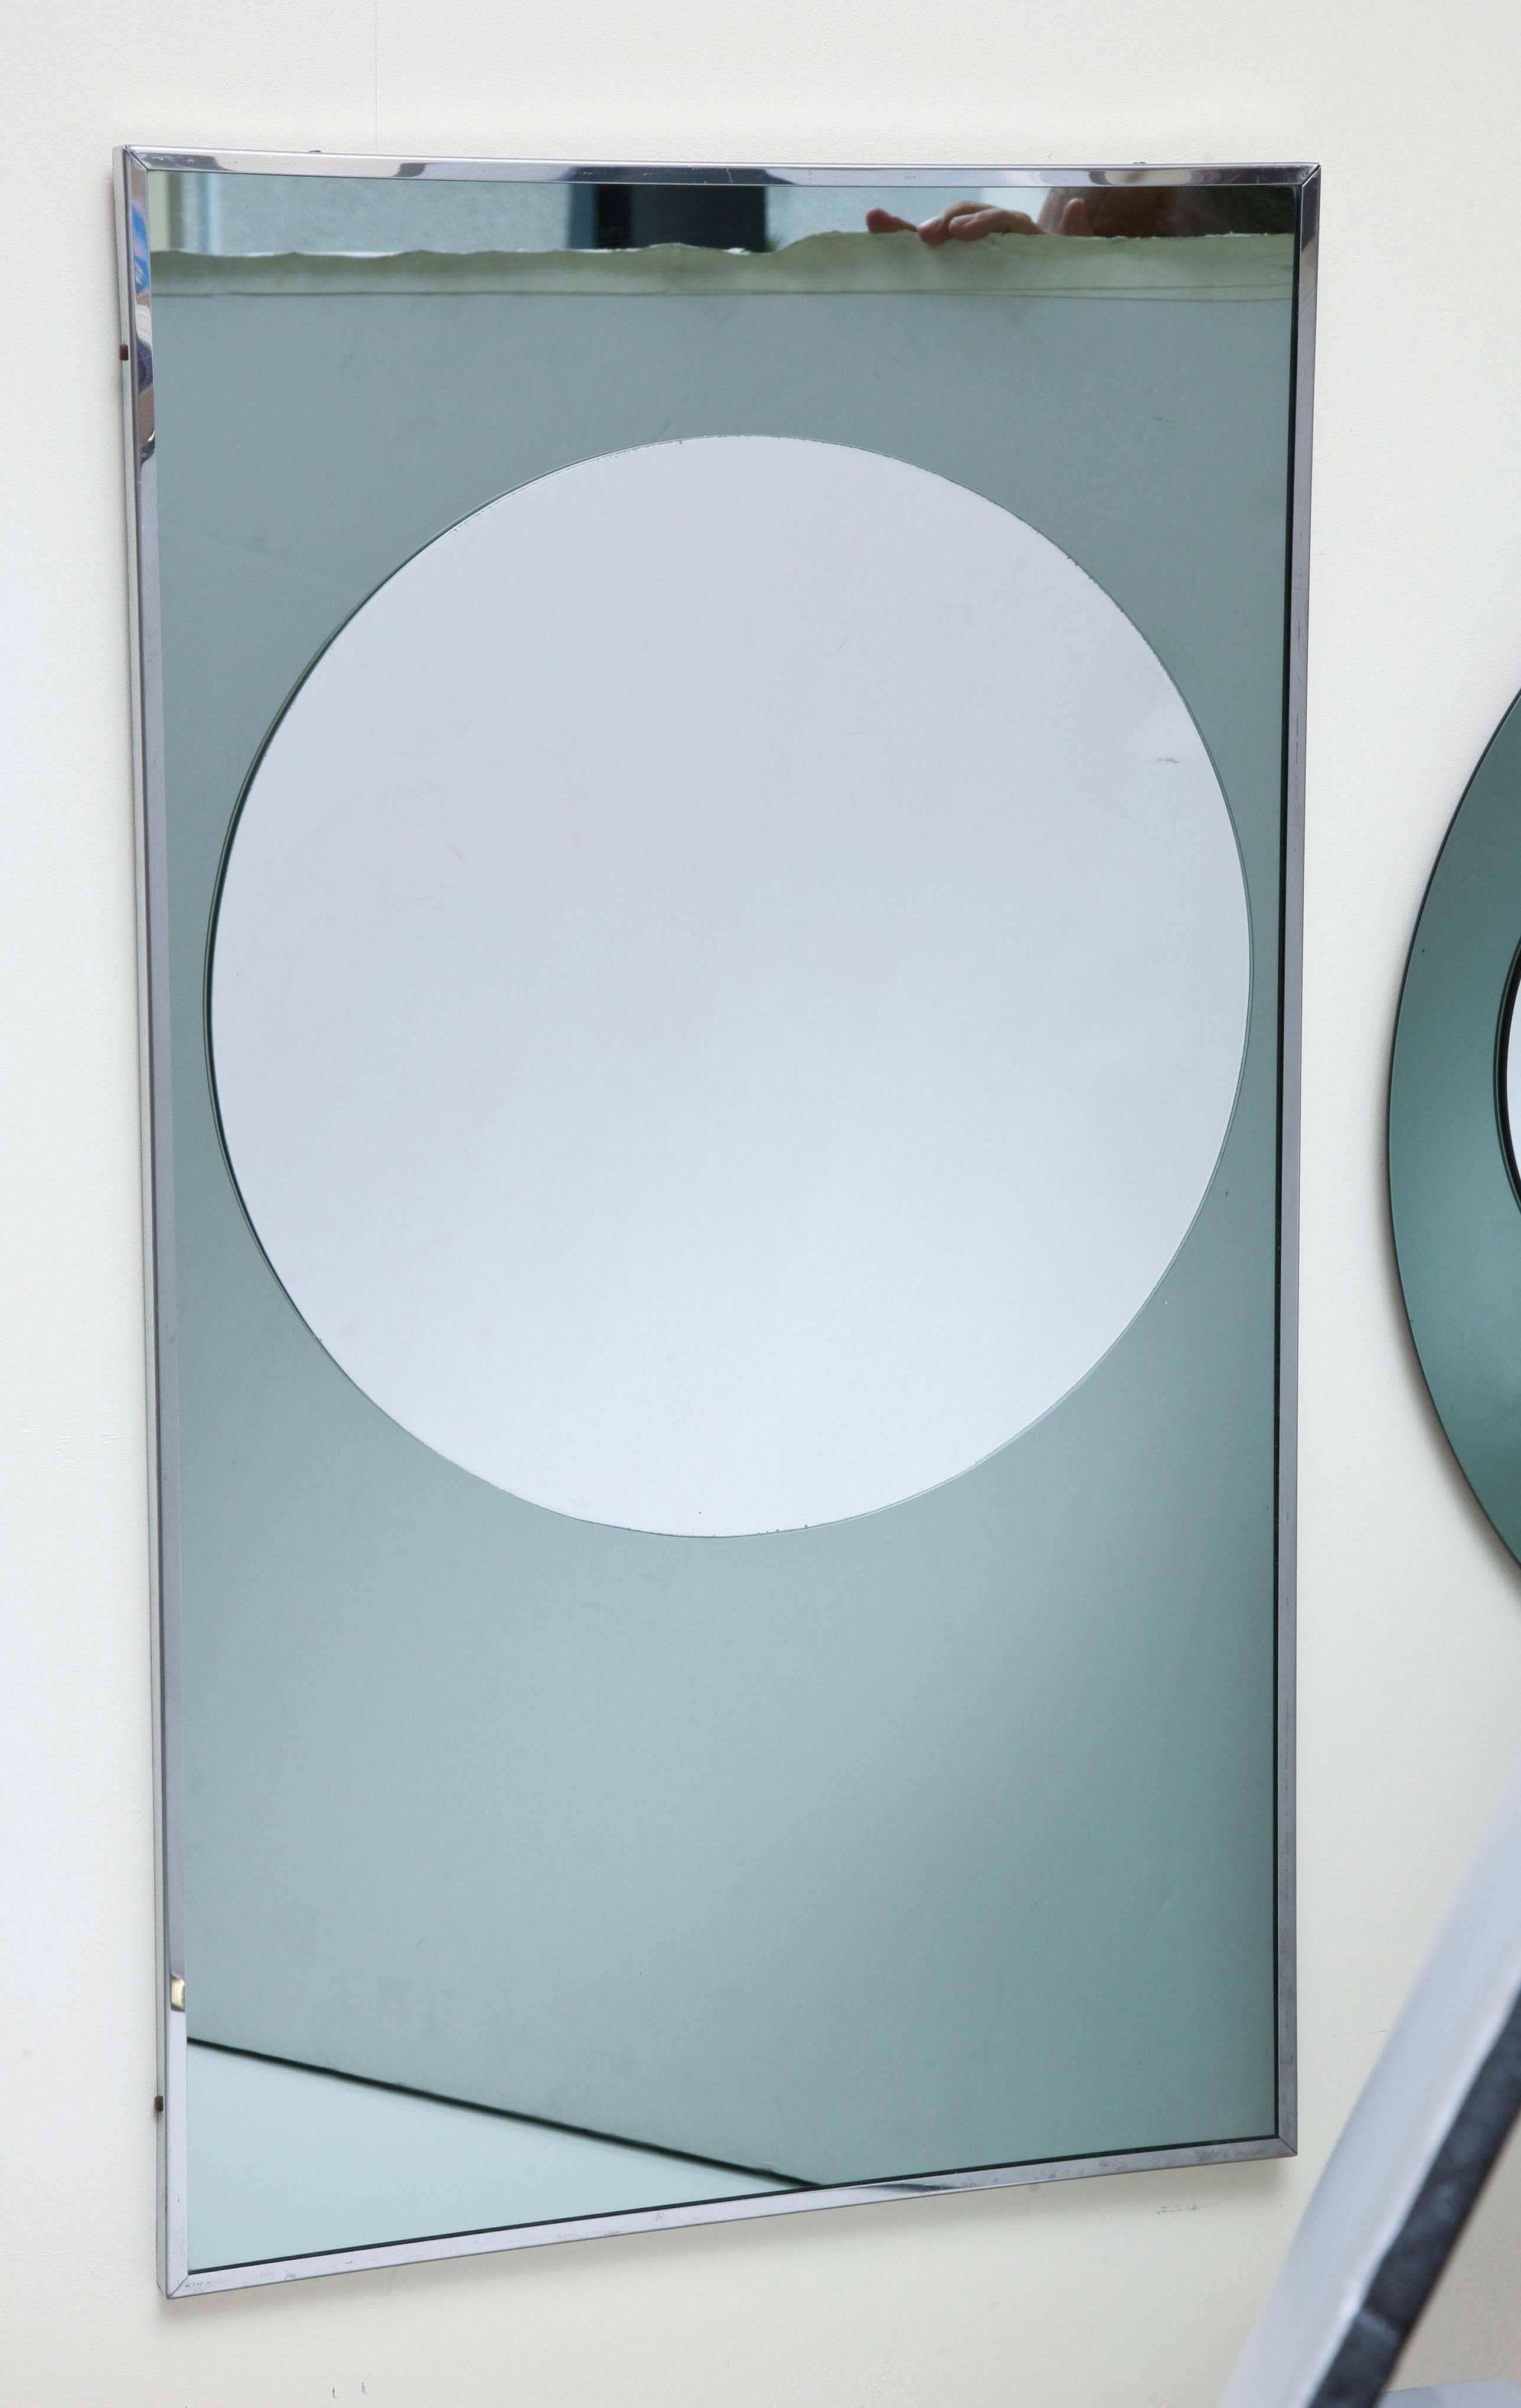 Modern unique 3D round and rectangular. All glass venetian wall mirrors.
Dimension round mirror:
Diameter: 23.5 inches, depth: 1 inch.